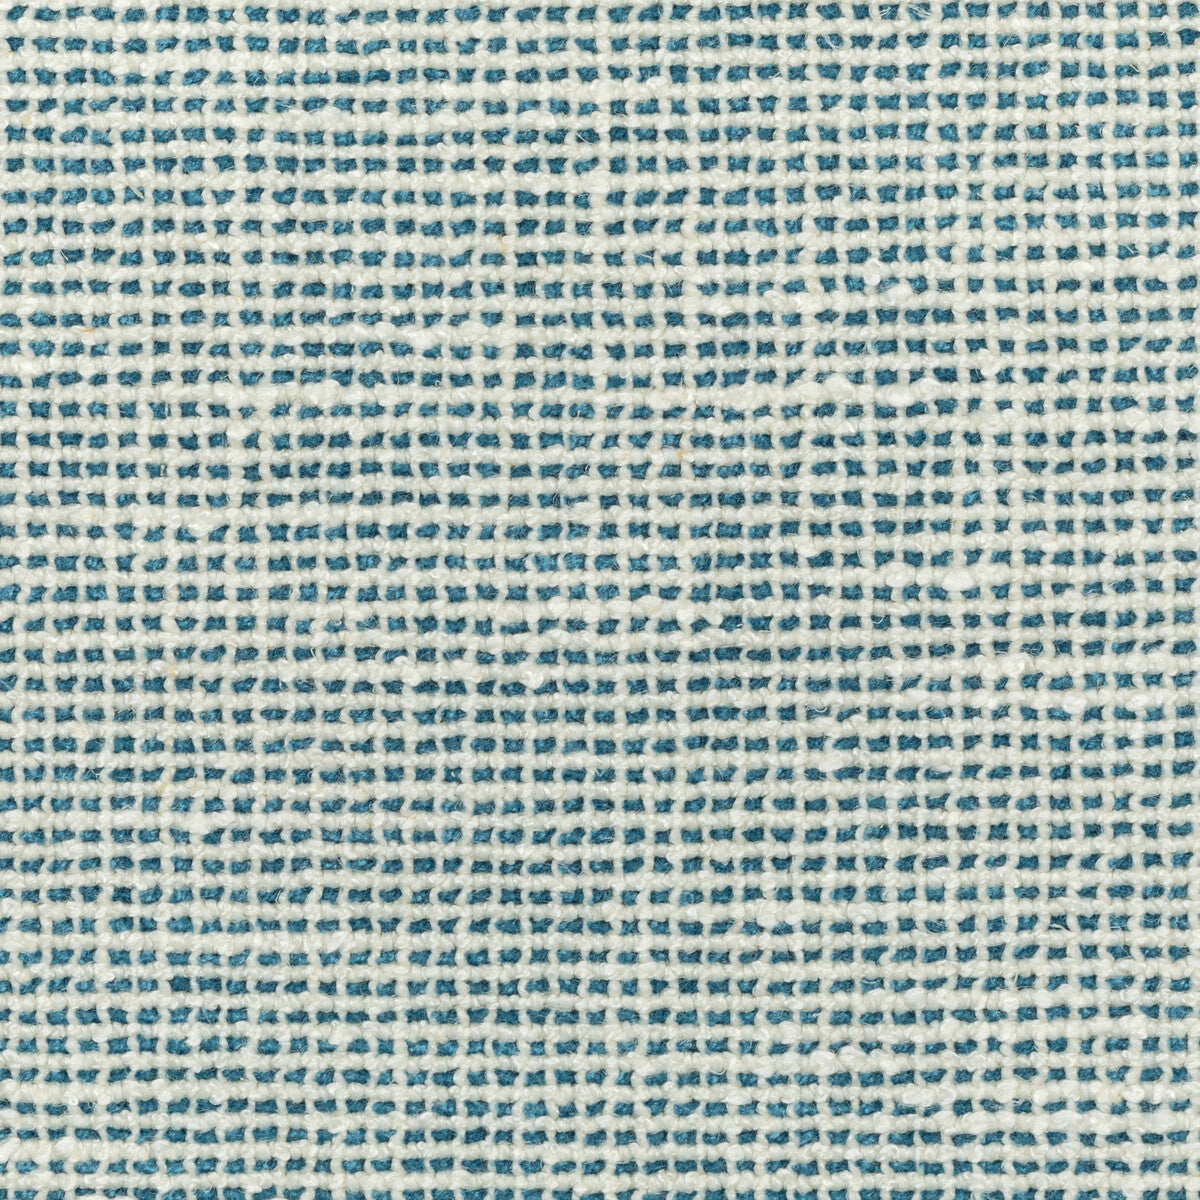 Skiffle fabric in teal color - pattern 34449.3535.0 - by Kravet Couture in the Luxury Textures II collection